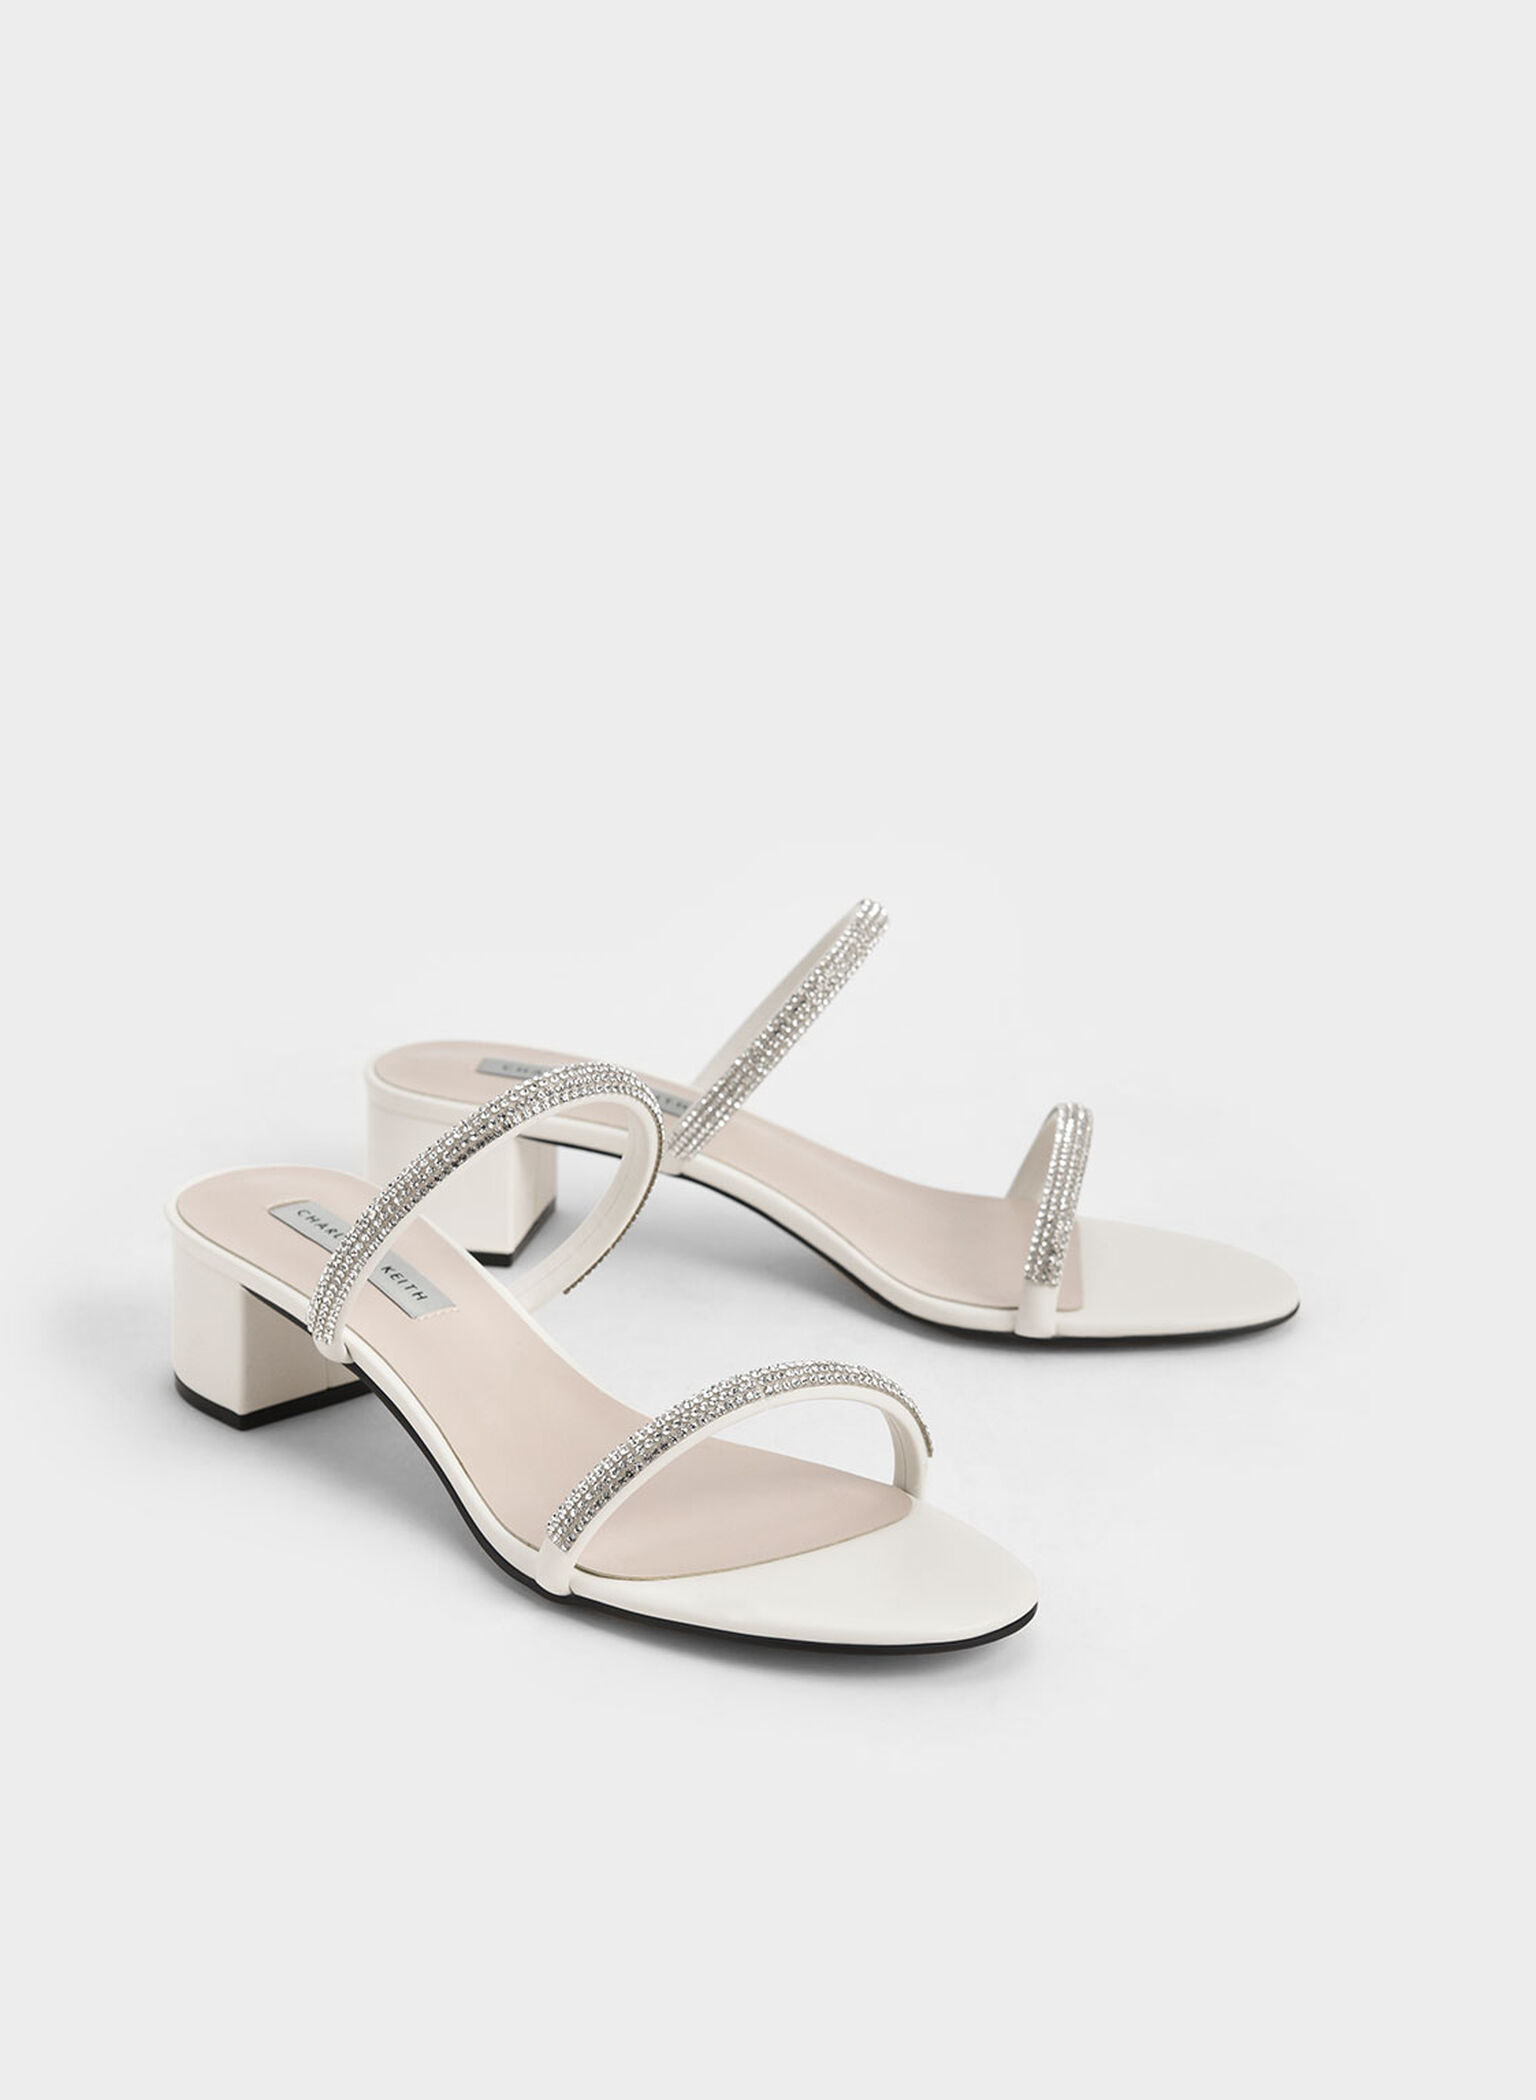 Cream Gem-Encrusted Strappy Heeled Mules - CHARLES & KEITH US